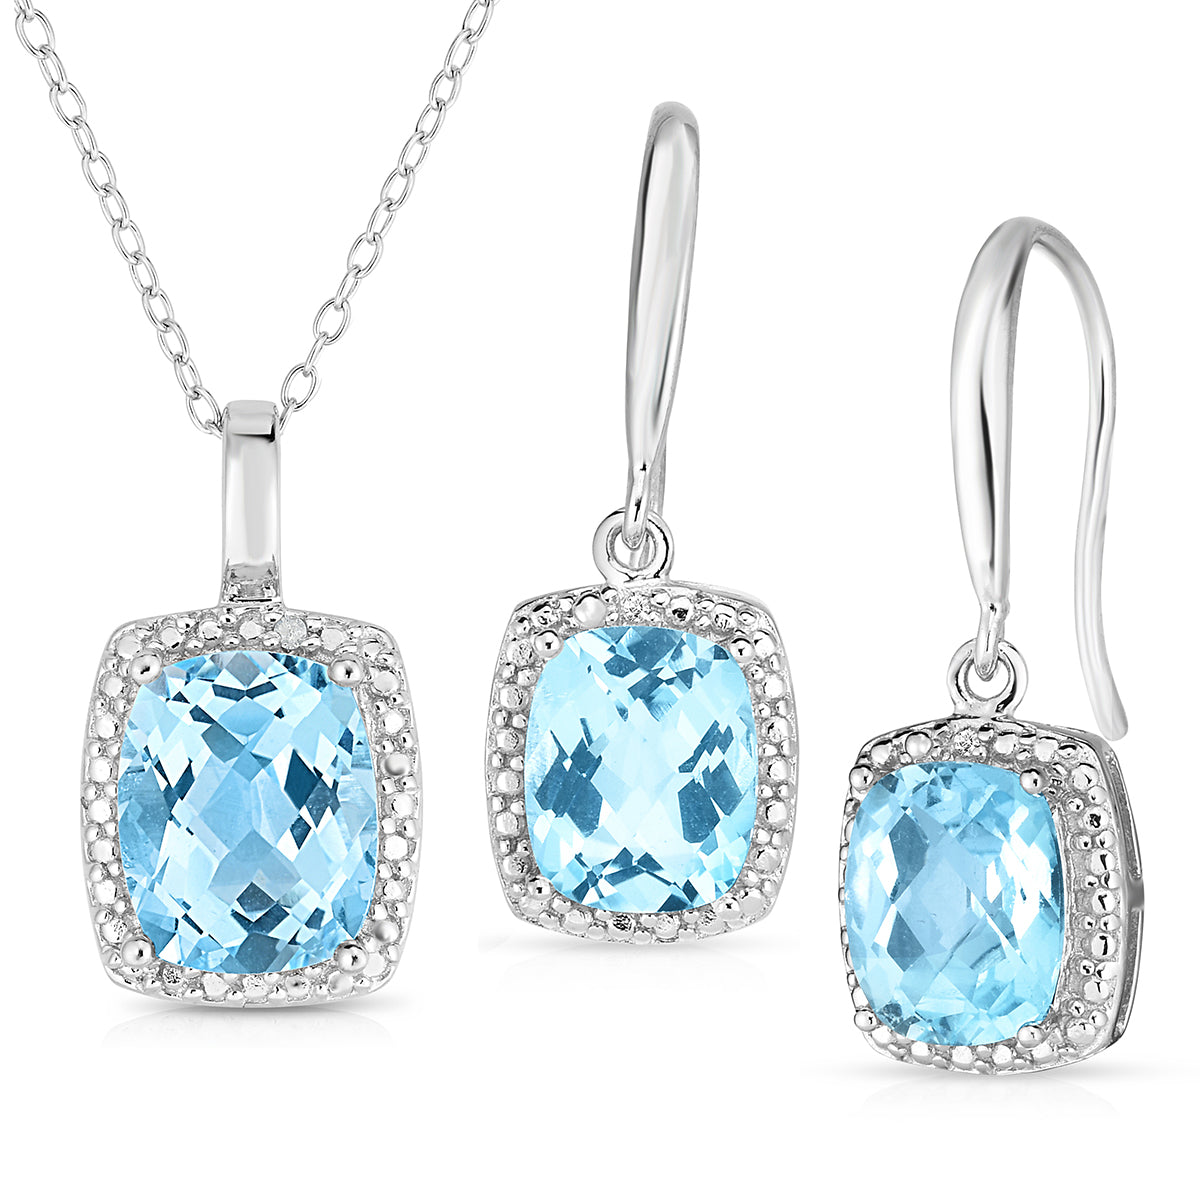 Diamond & Blue Topaz Earring and Necklace Set